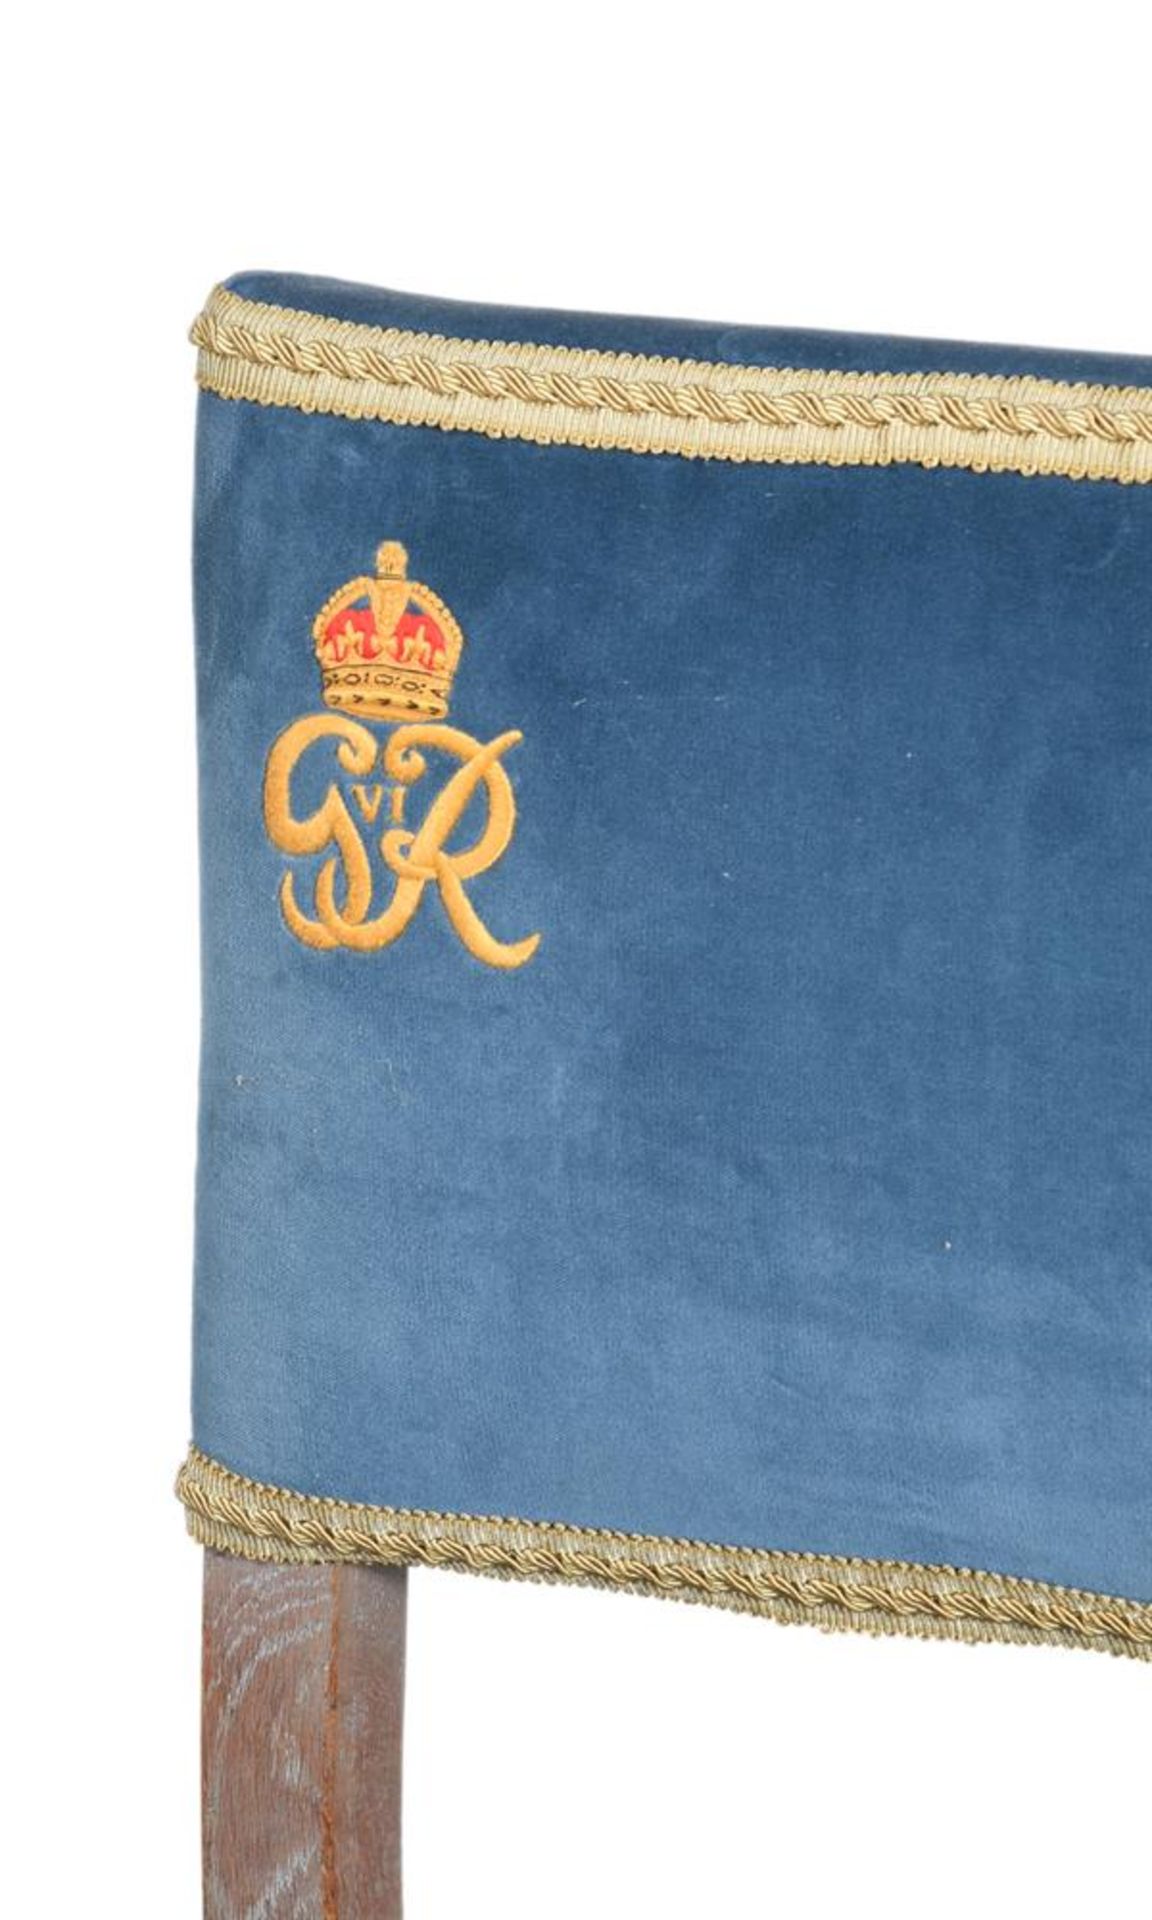 A GEORGE VI CORONATION LIMED OAK AND UPHOLSTERED CHAIRBY B. NORTH & SONS, WEST WYCOMBE, CIRCA 1937 - Image 2 of 5